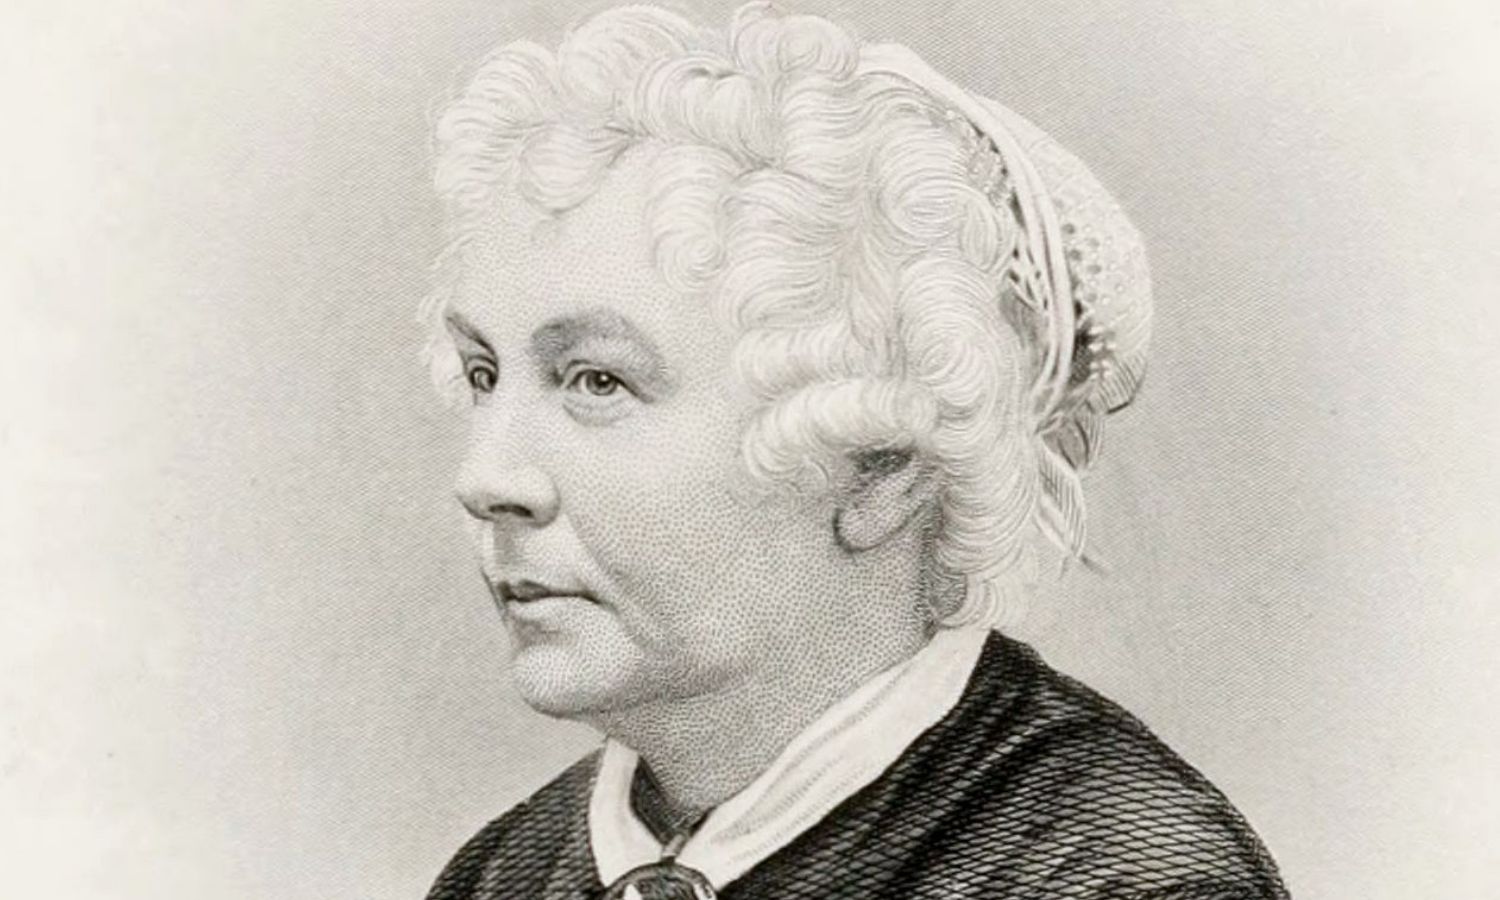 OTD in 1869: Feminist Elizabeth Cady Stanton became the 1st woman to testify before Congress.